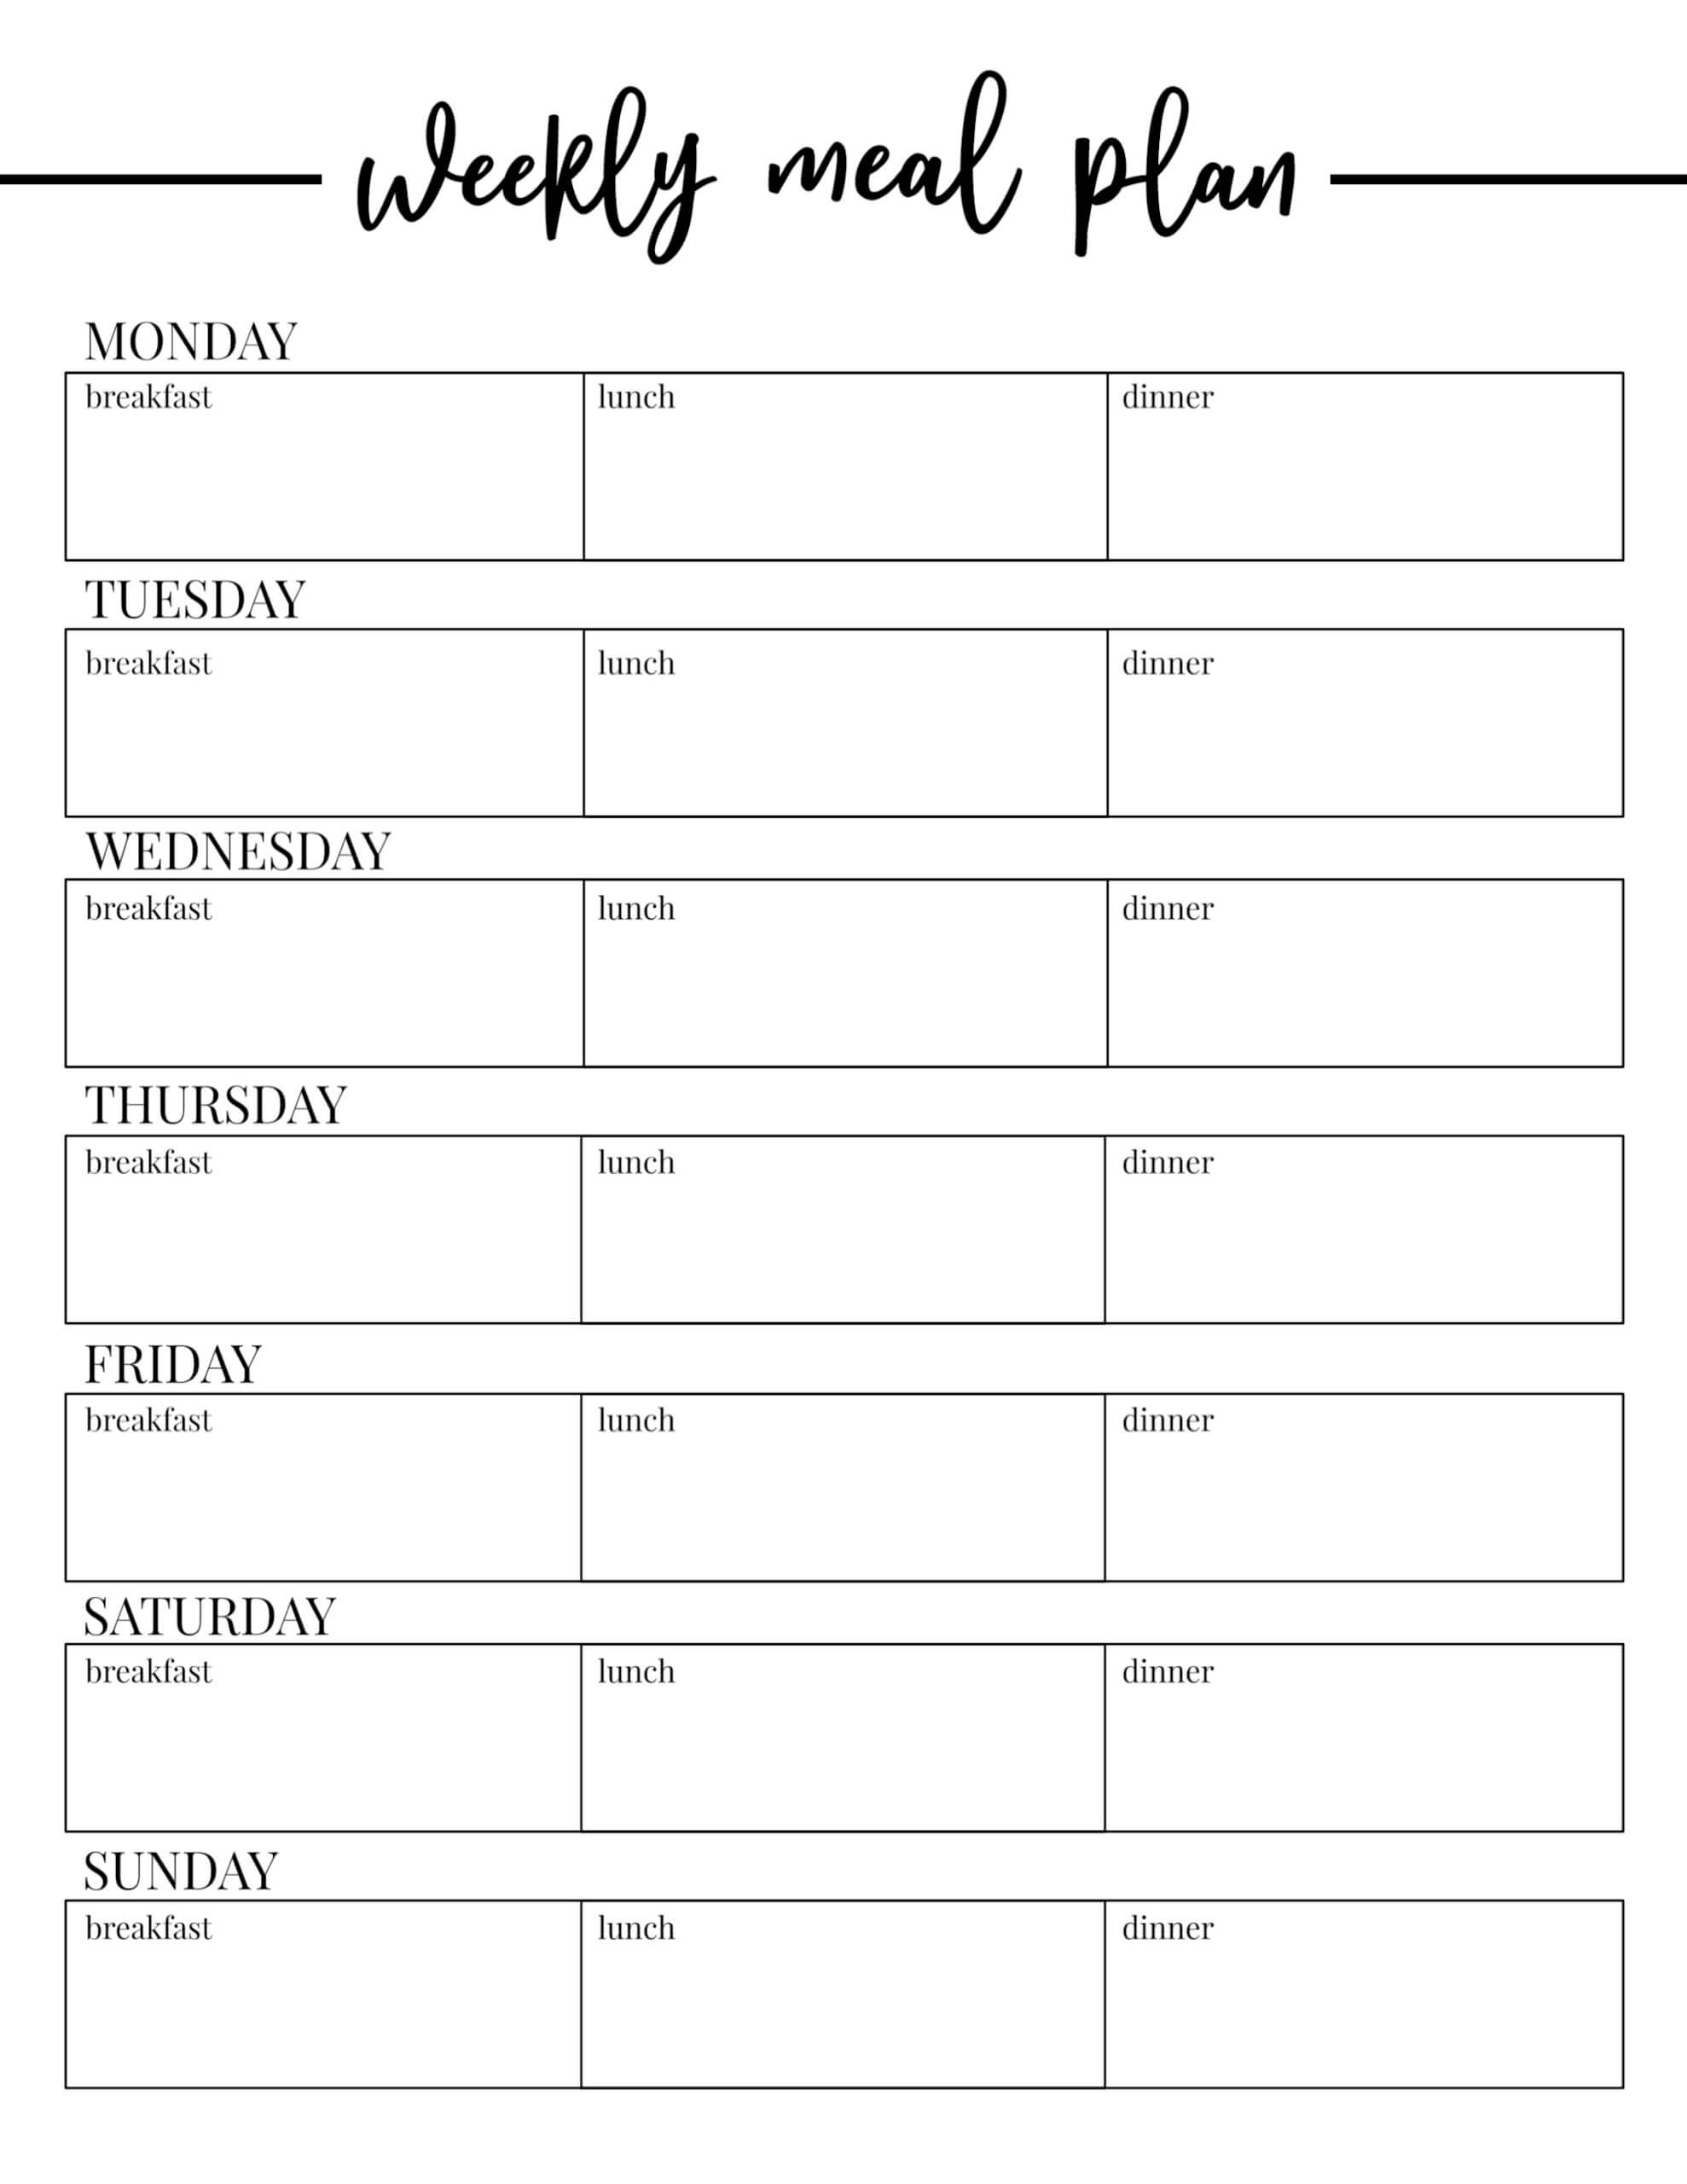 005 Free Meal Planner Template Word Ideas Weekly Plan With Menu Planning Template Word